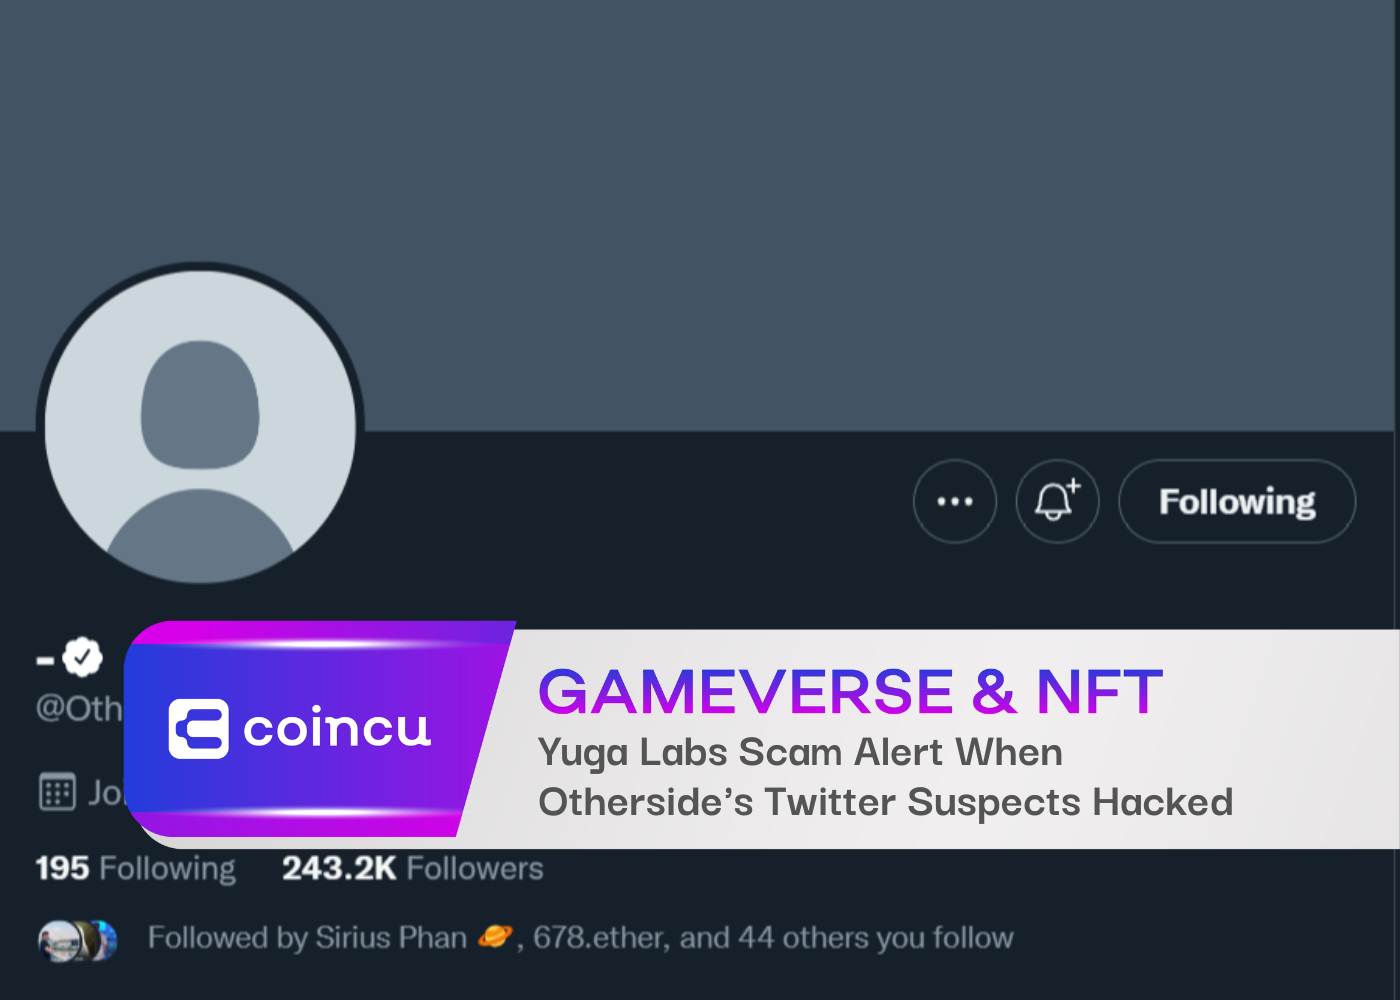 Yuga Labs Scam Alert When Otherside's Twitter Account Suspects Hacked